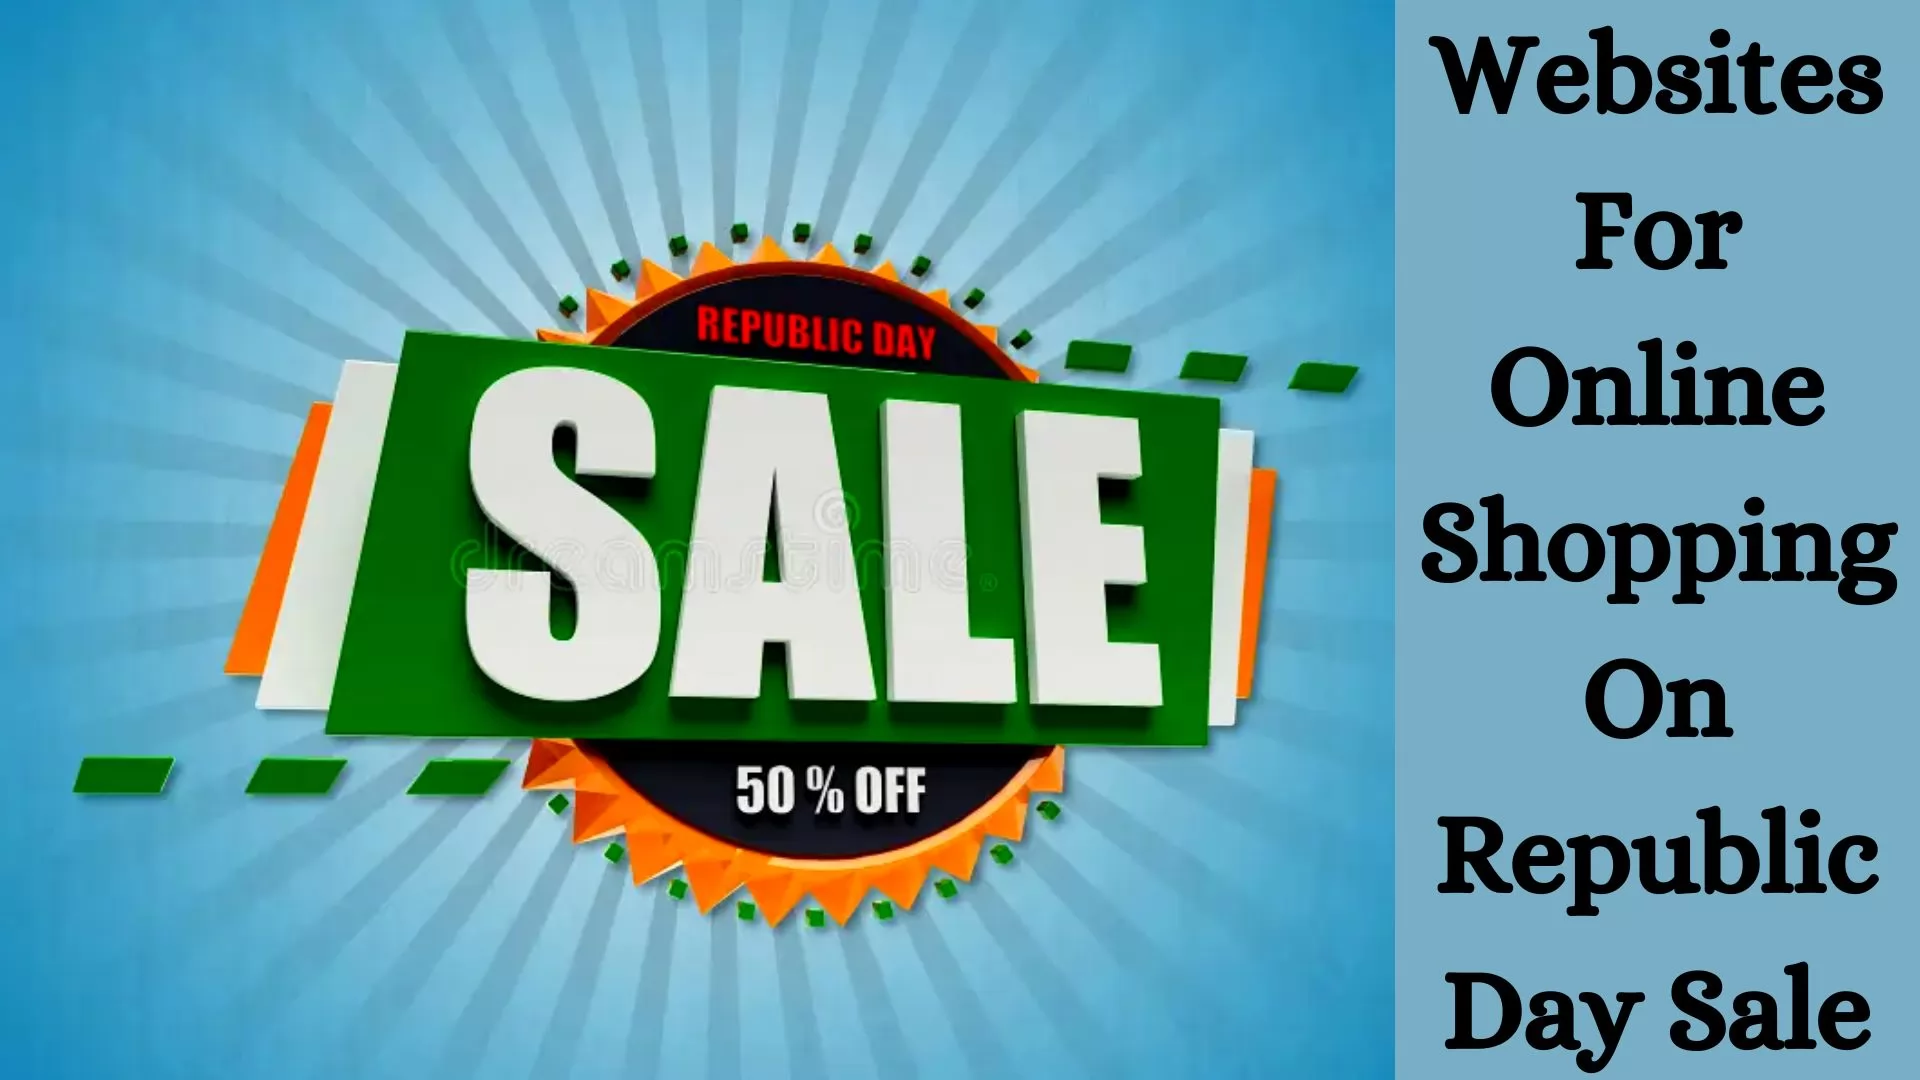 Websites For Online Shopping On Republic Day Sale